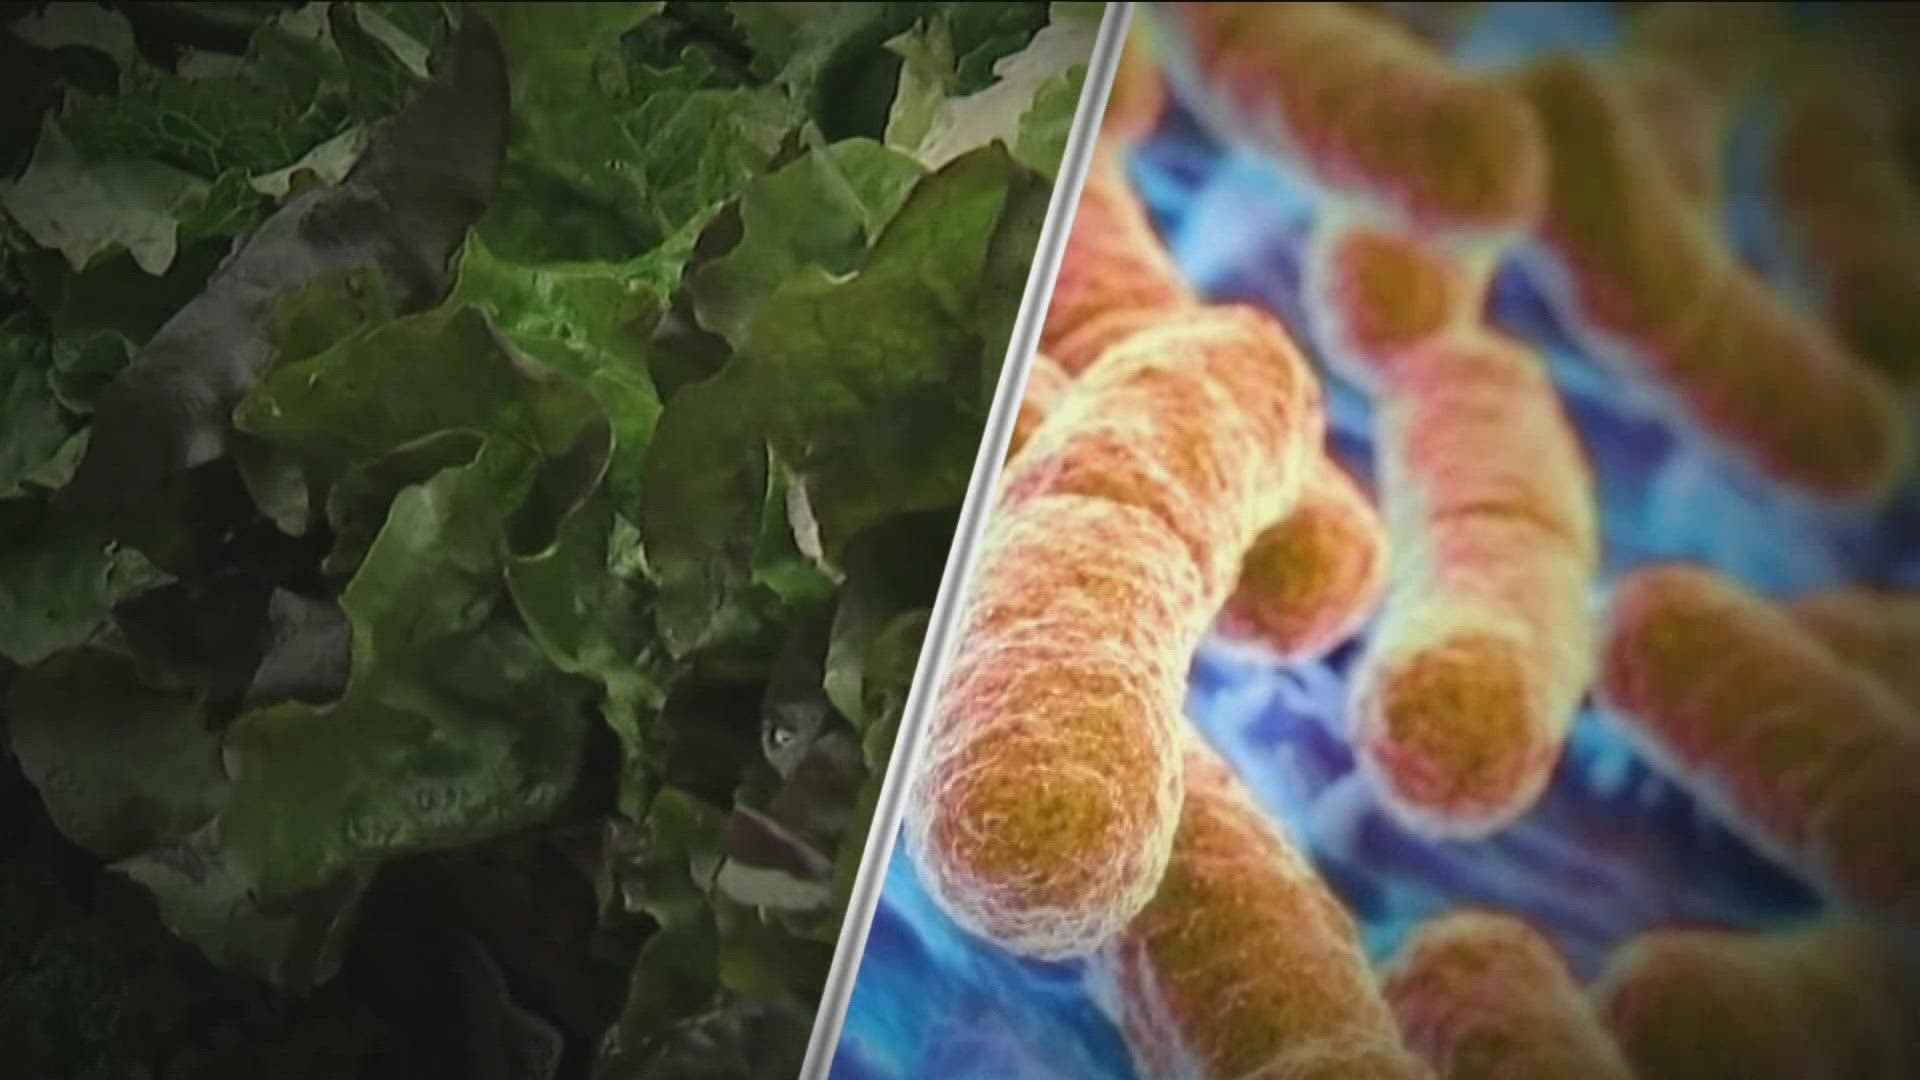 The E. Coli outbreak has now infected 37 people and hospitalized 10.